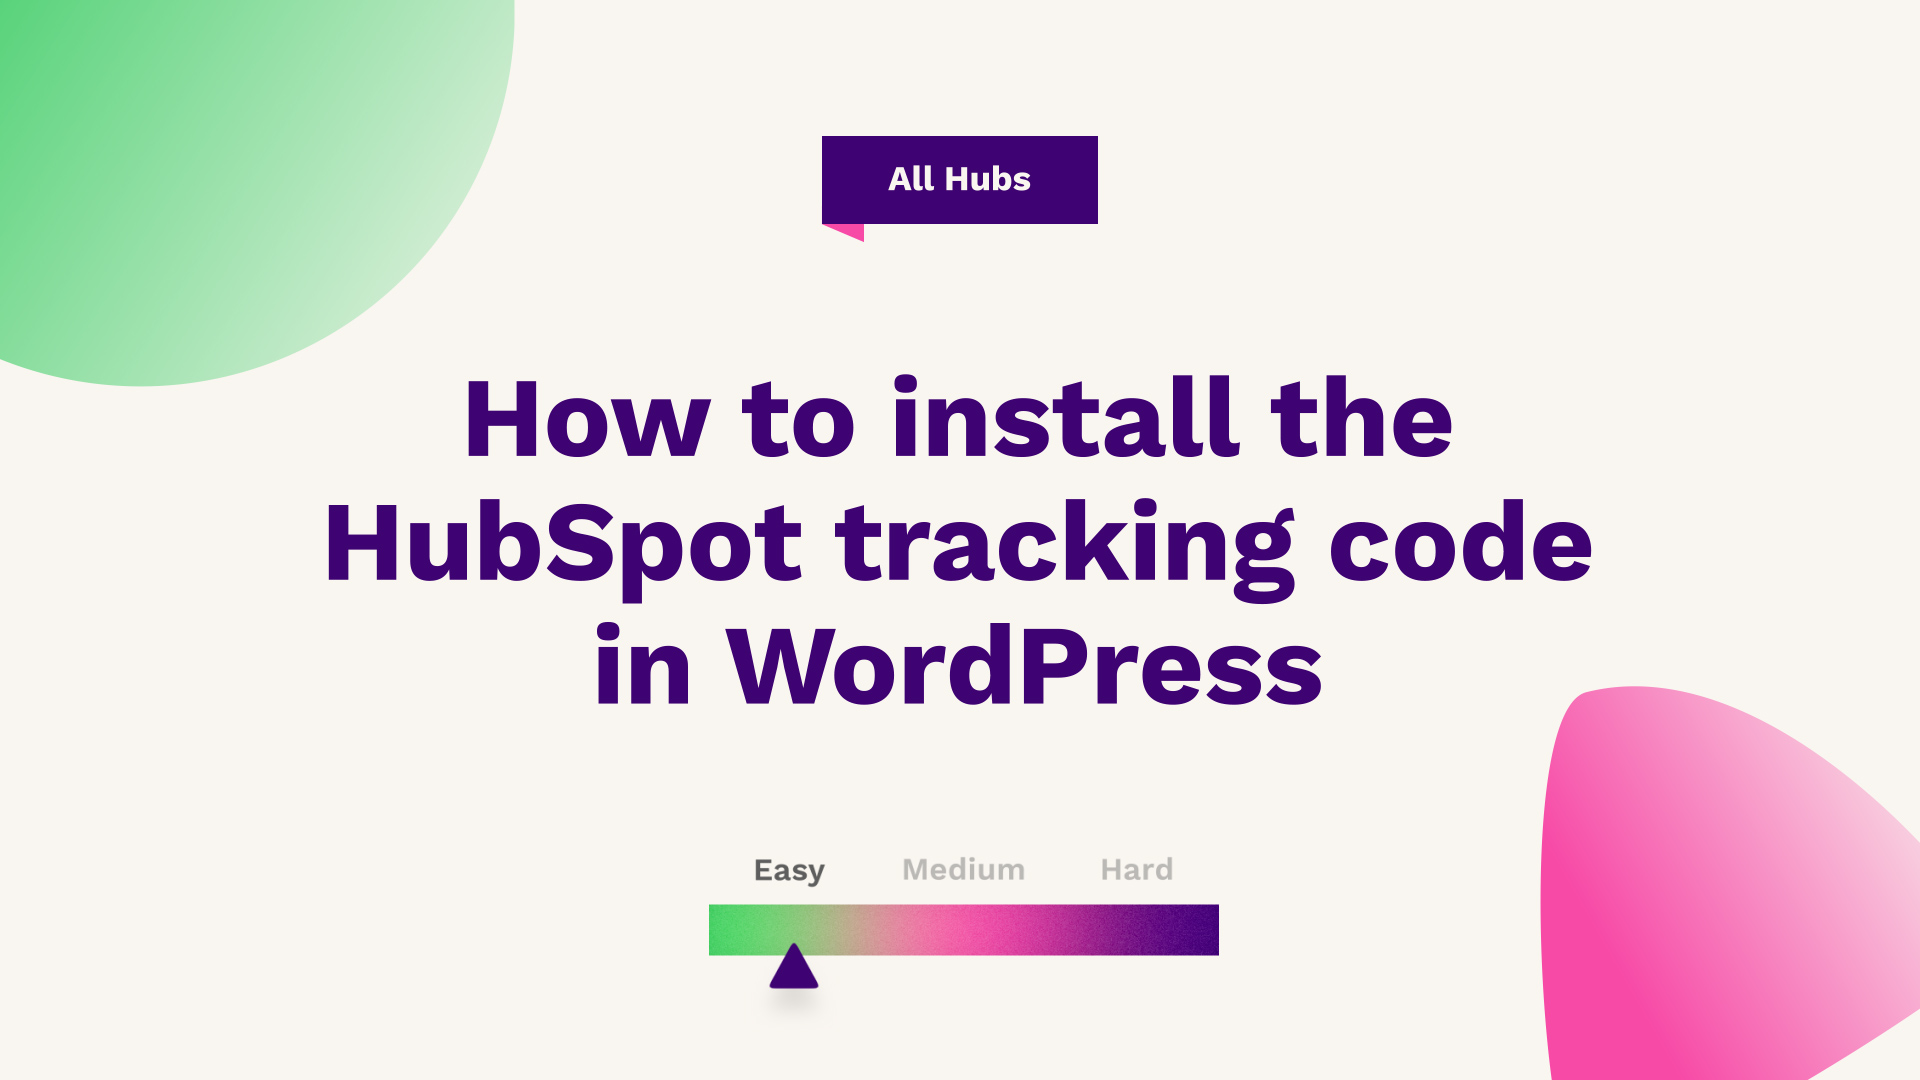 How to Install the HubSpot Tracking Code in WordPress